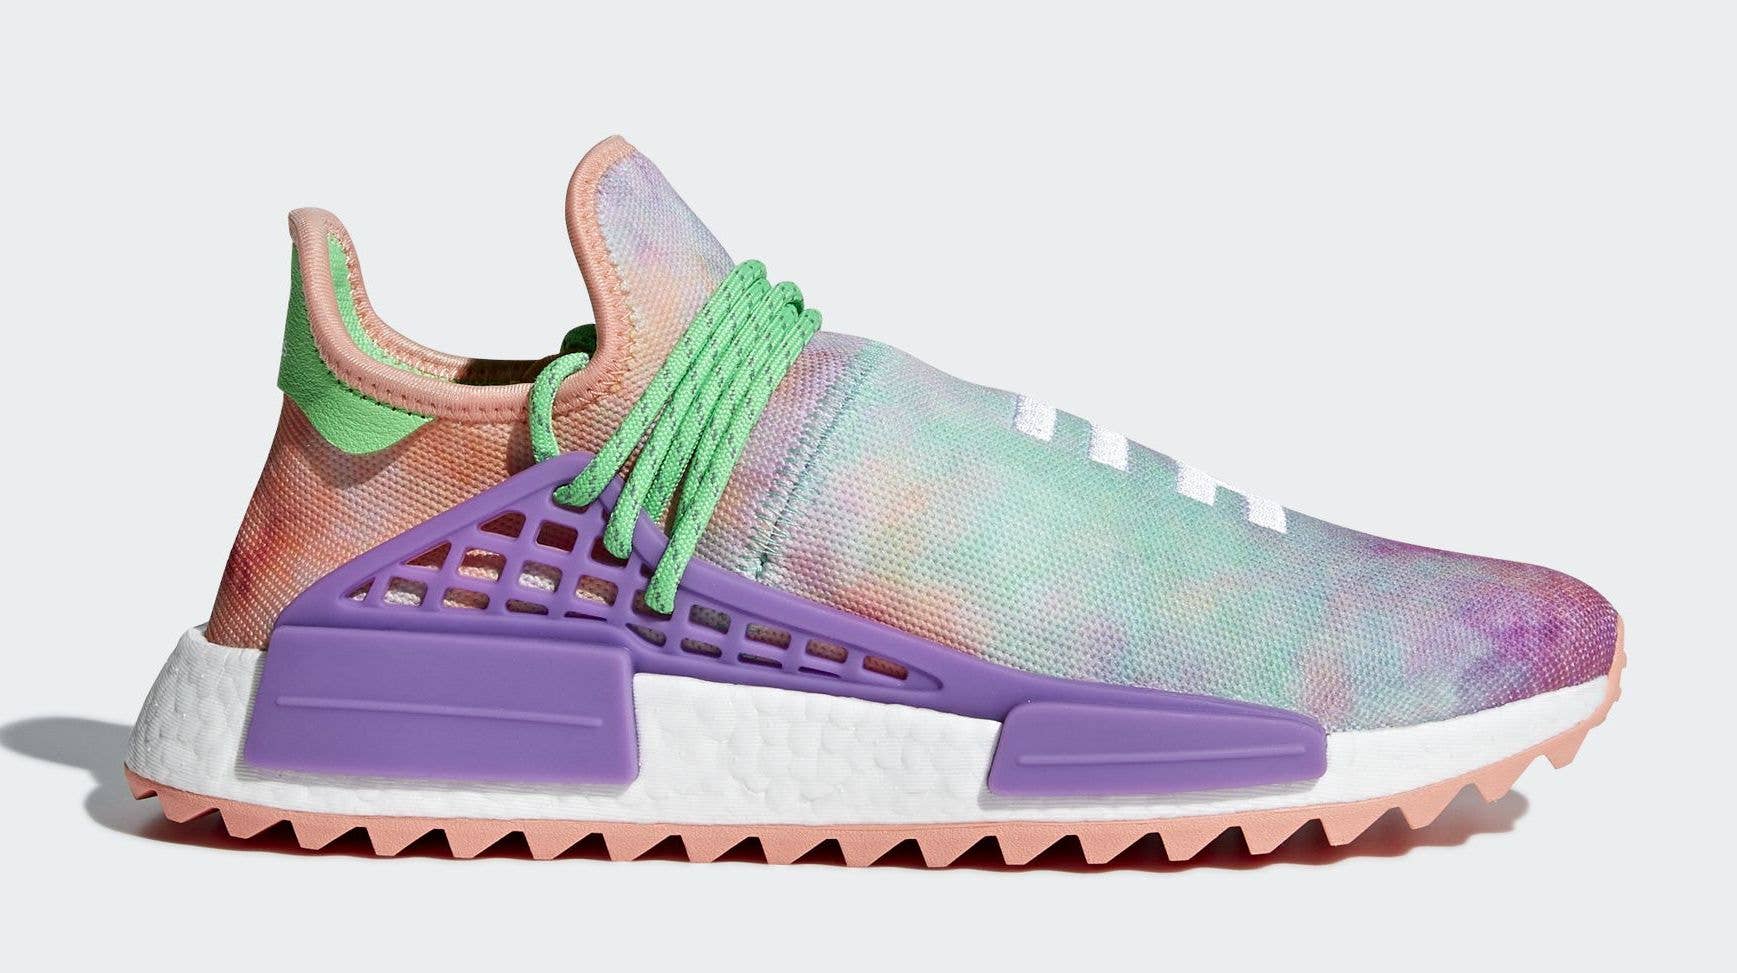 Sign Ups Are Open for the Pharrell x Adidas HU NMD 'Holi